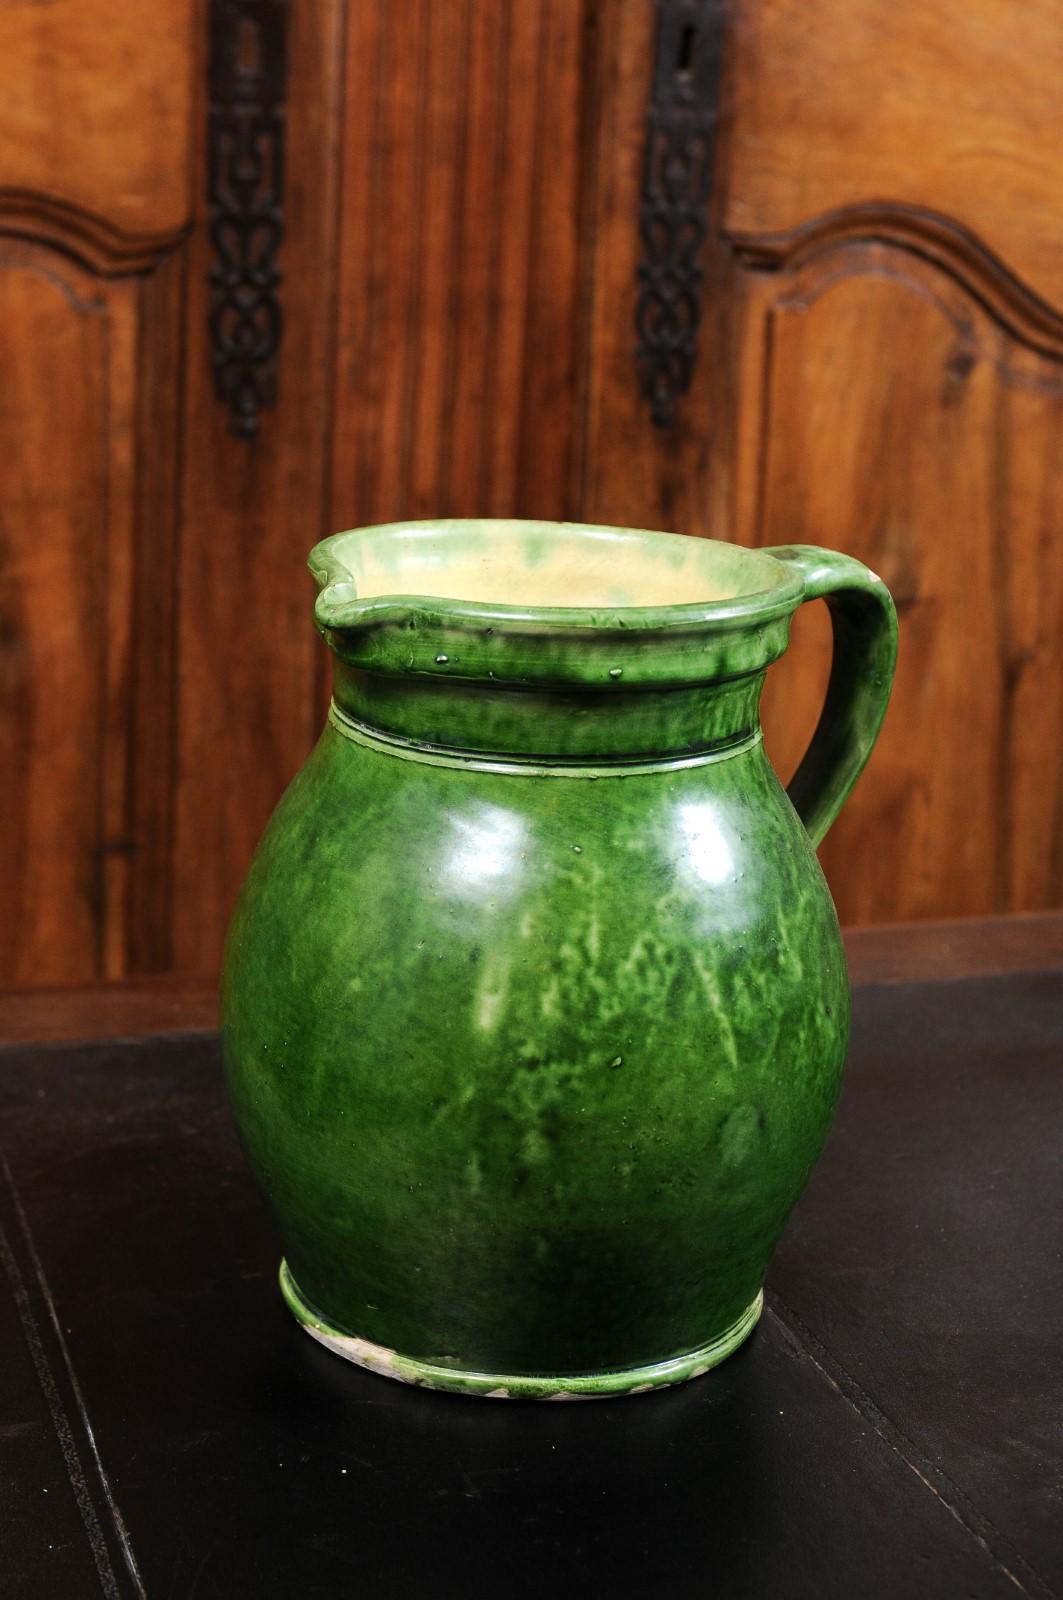 Rustic French Provincial 19th Century Pitcher with Green Glazed Body 1